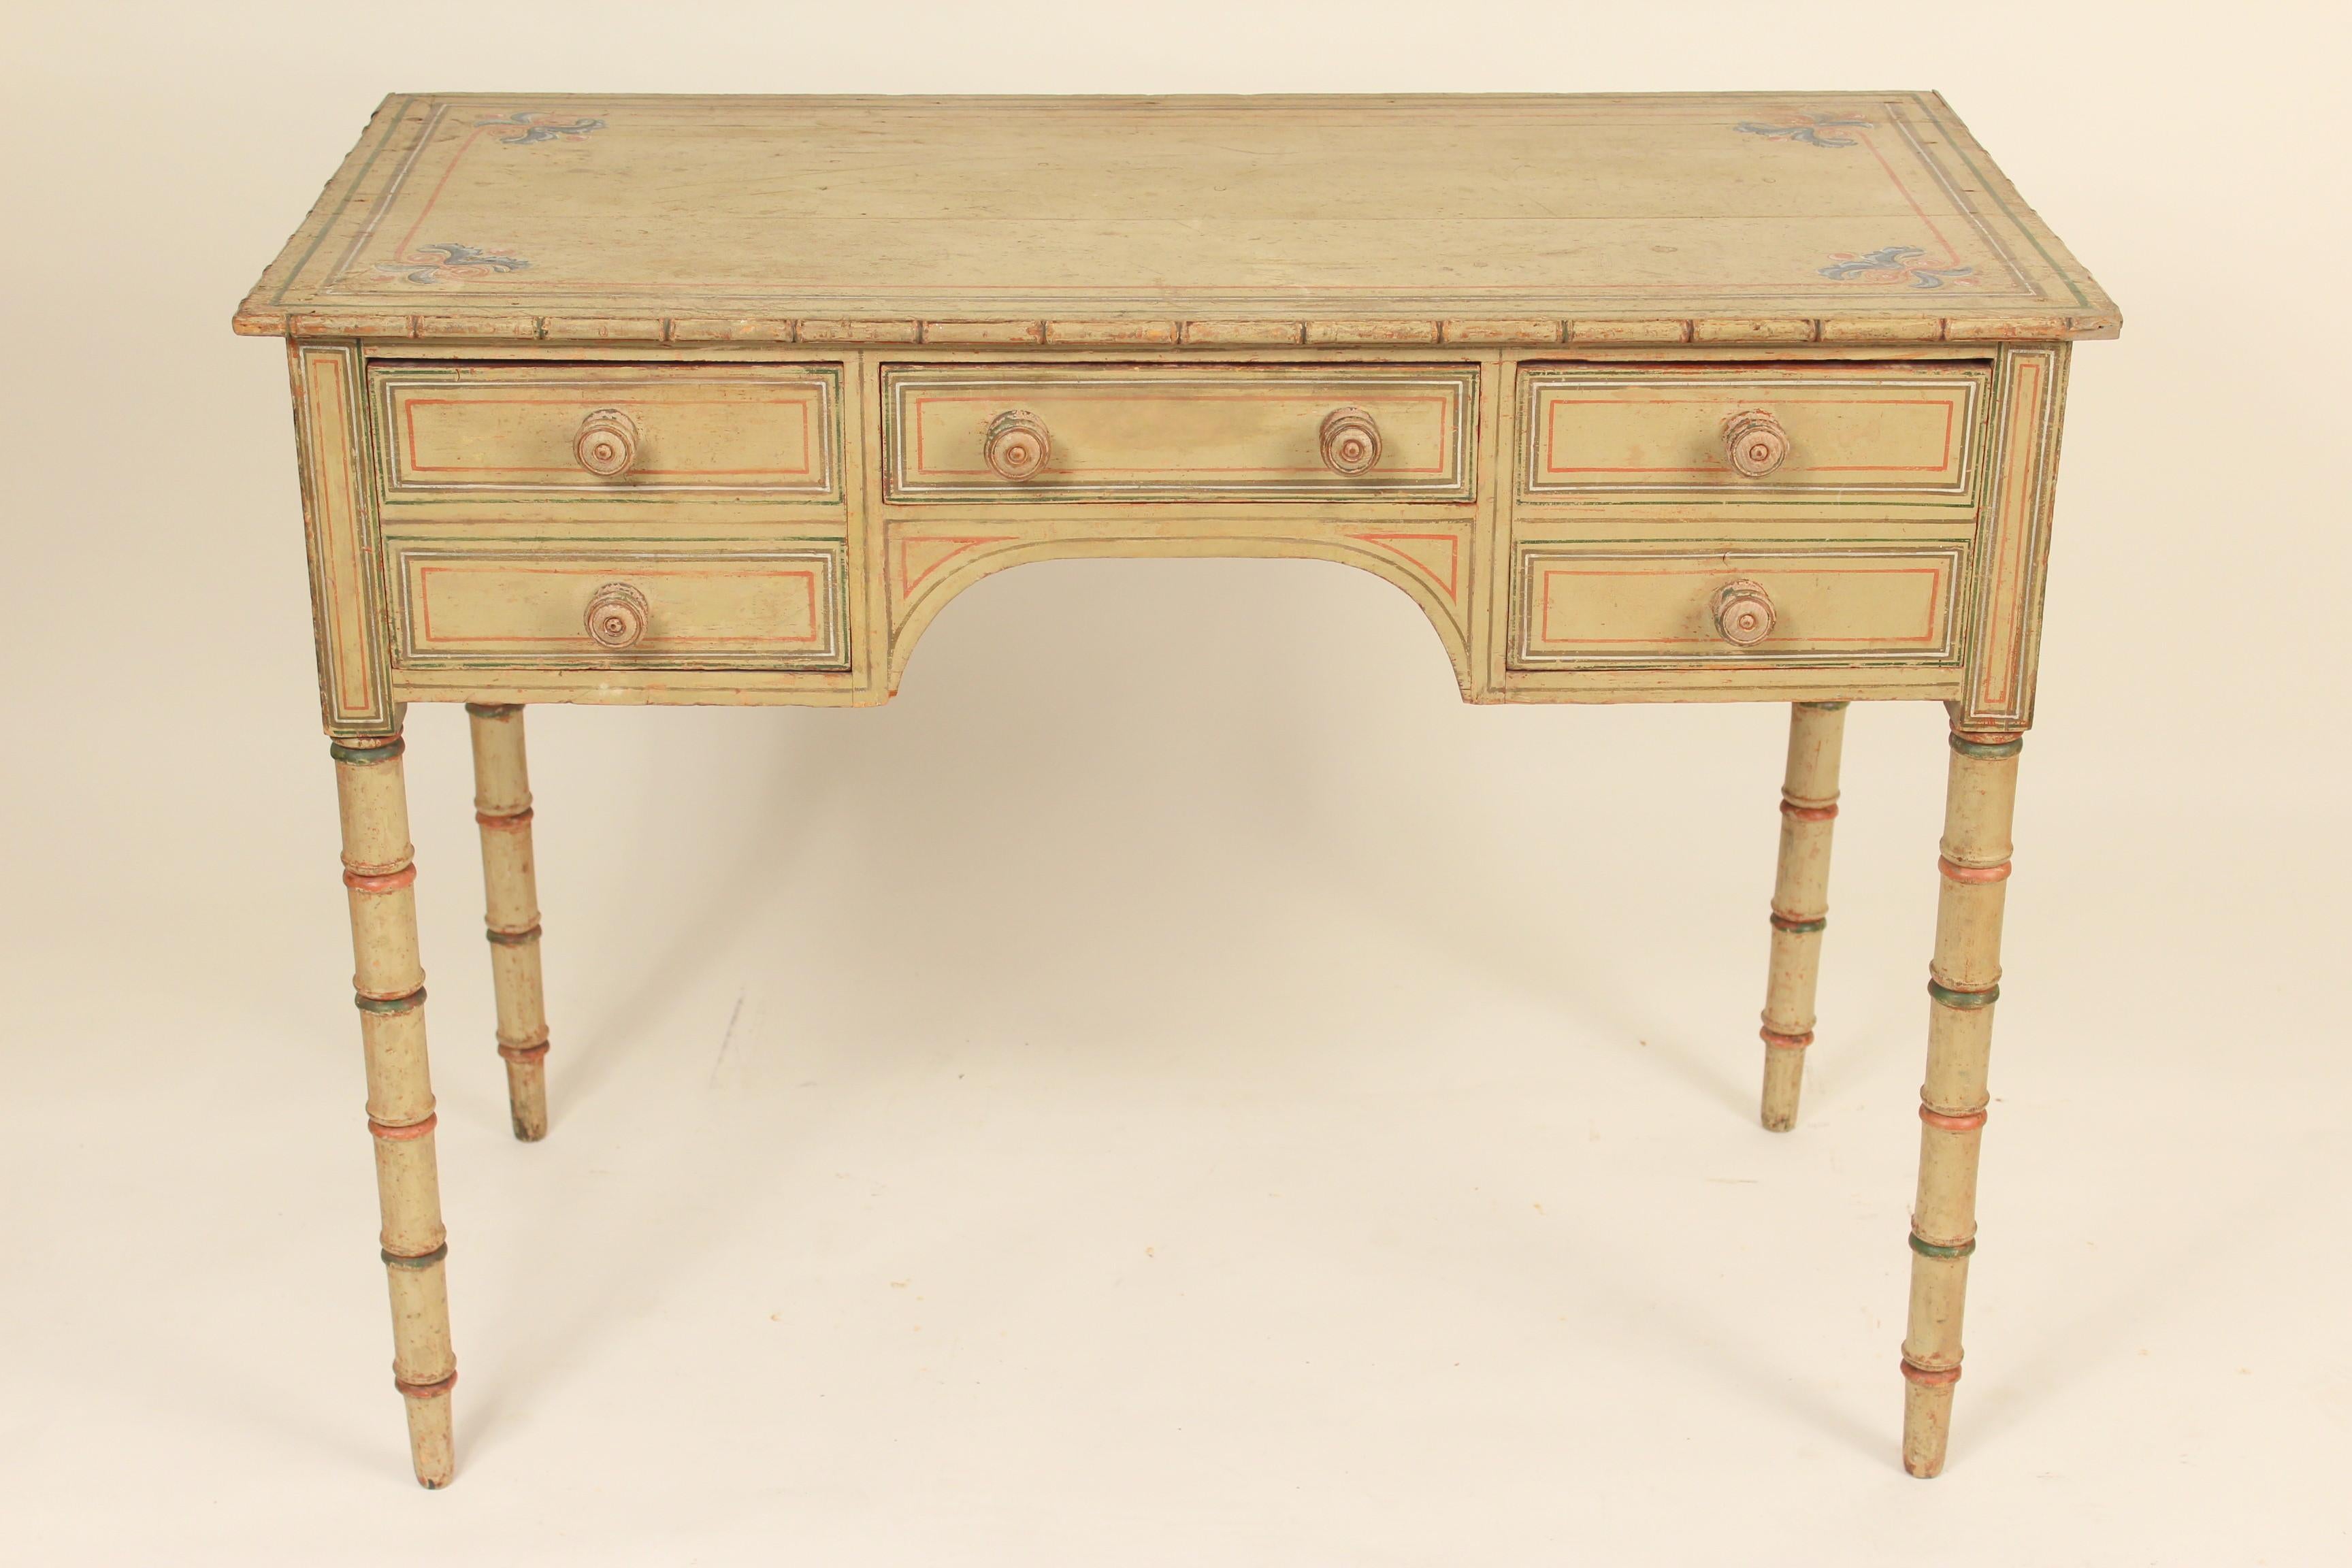 Painted pine English Regency or American writing table / desk, with old paint and bamboo style turned legs, early 19th century. Label indicates this was formerly the property of Ralph Lauren, Polo.